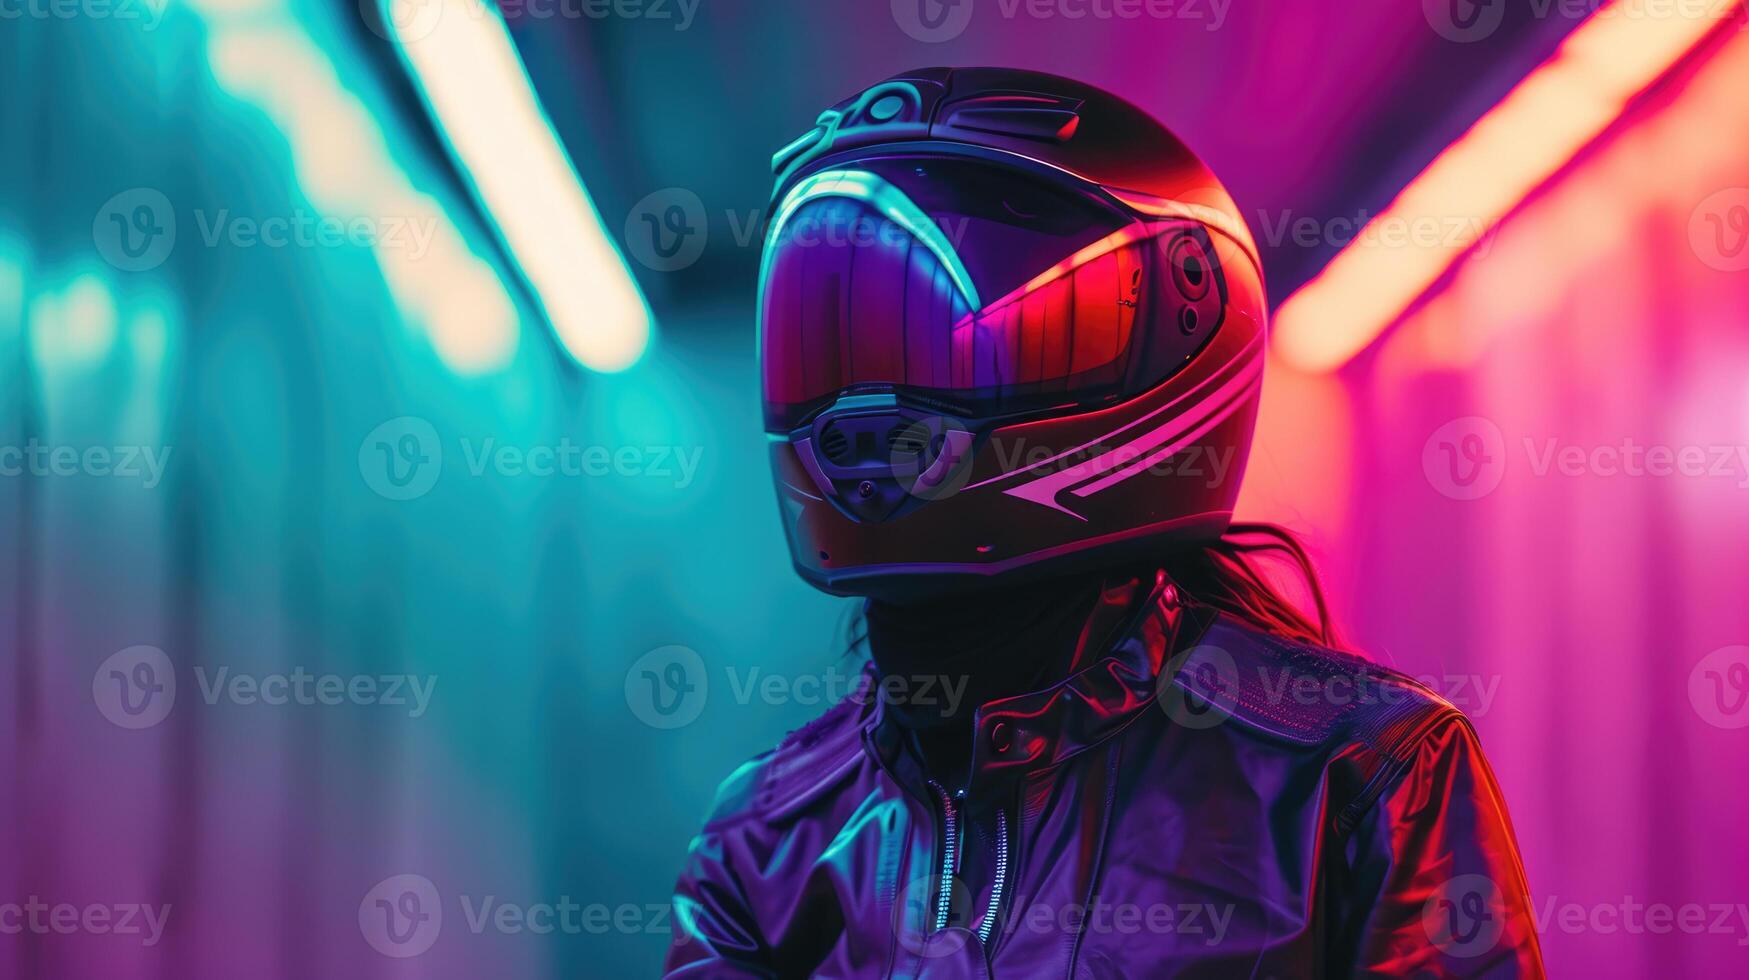 AI generated Space Futurism Trends Women's Jackets and Helmets Fashion, suitable for magazine covers, wallpapers, websites, and advertisements. photo